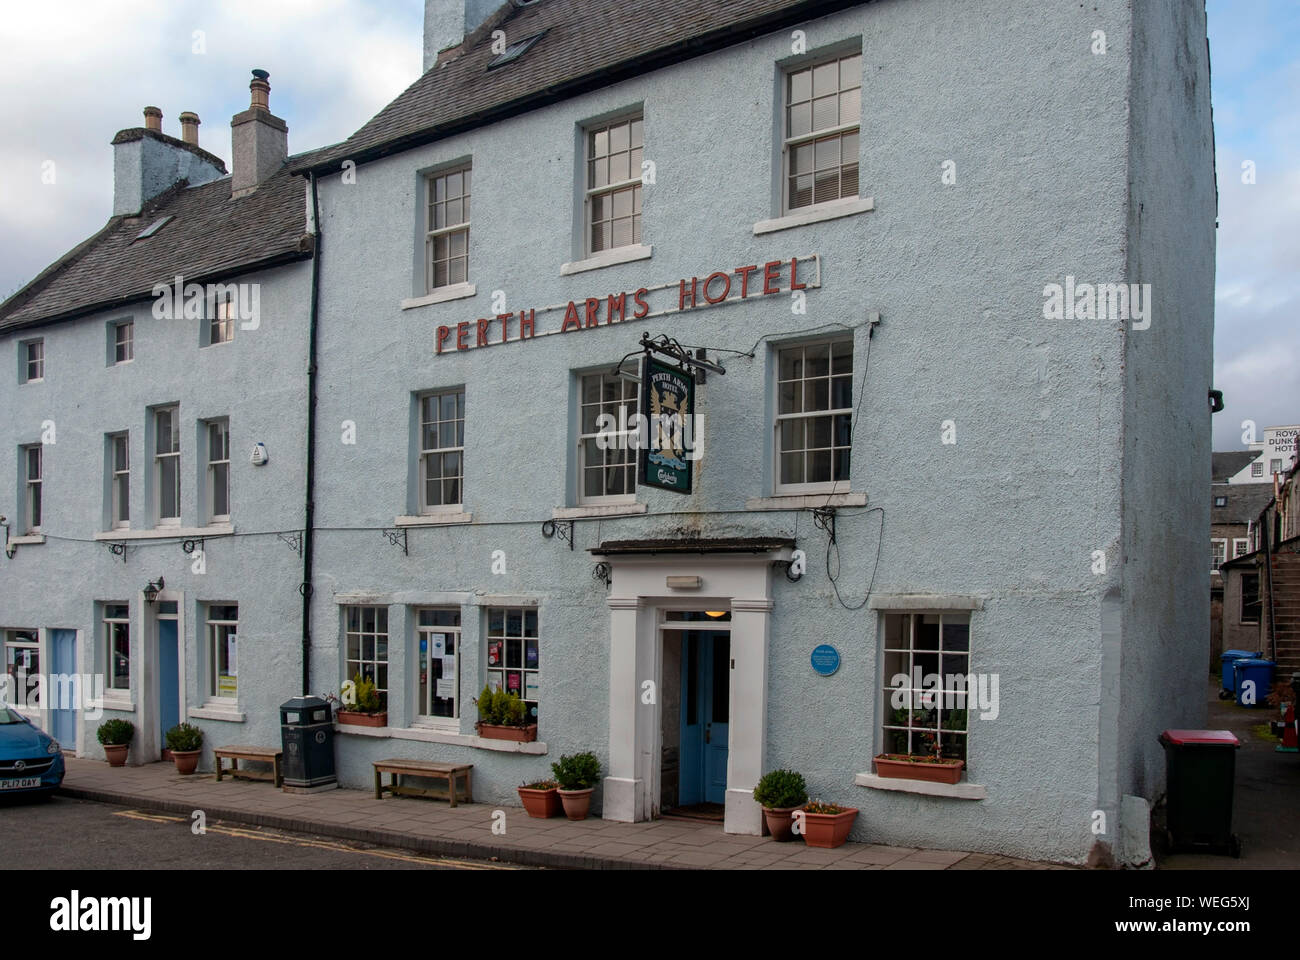 The Perth Arms Hotel High Street Dunkeld Perthshire Scotland United Kingdom exterior view duck egg blue painted accommodation room to let rooming boar Stock Photo